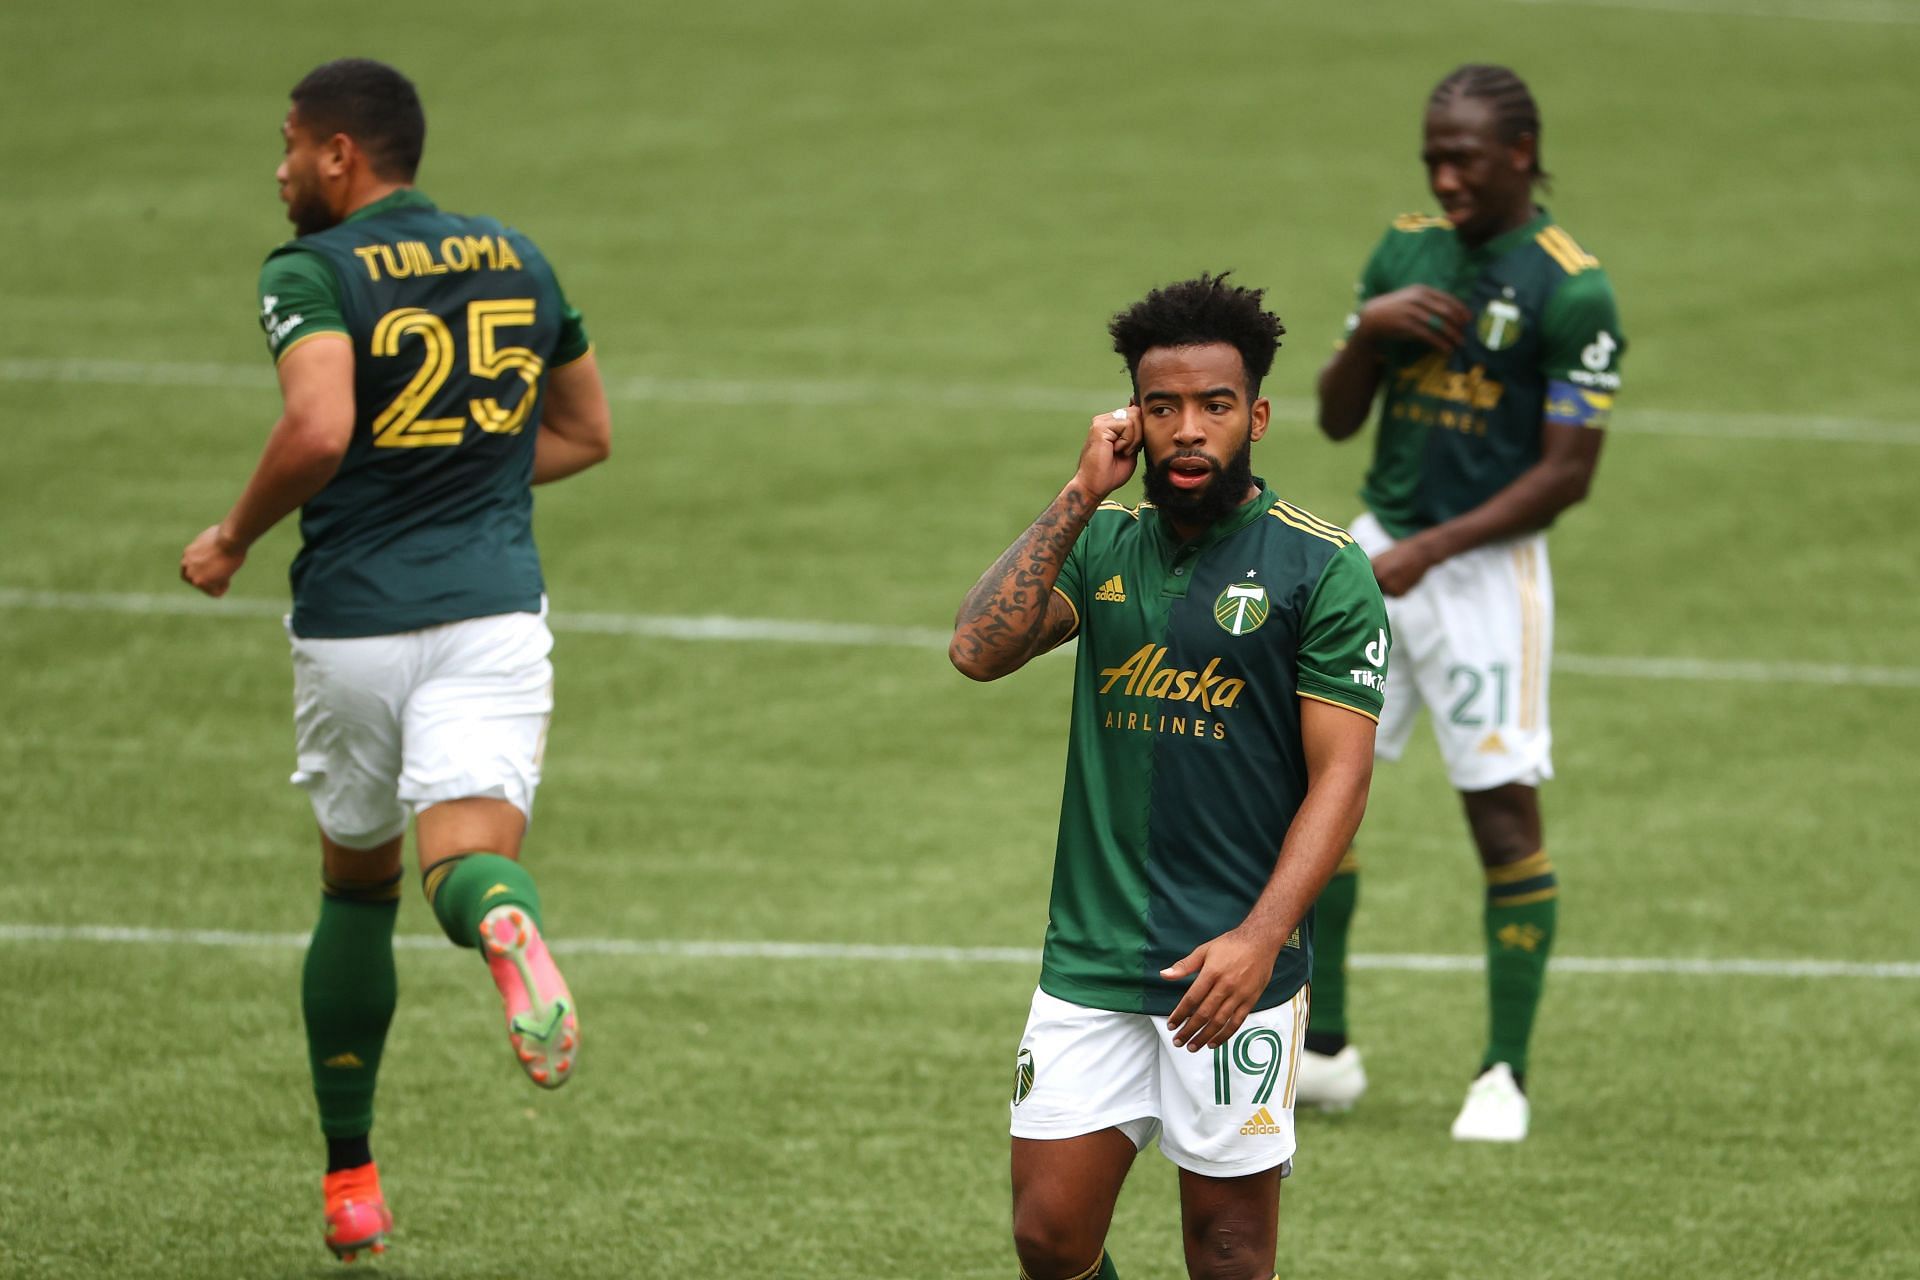 Portland Timbers face Orlando City in their upcoming MLS fixture on Sunday